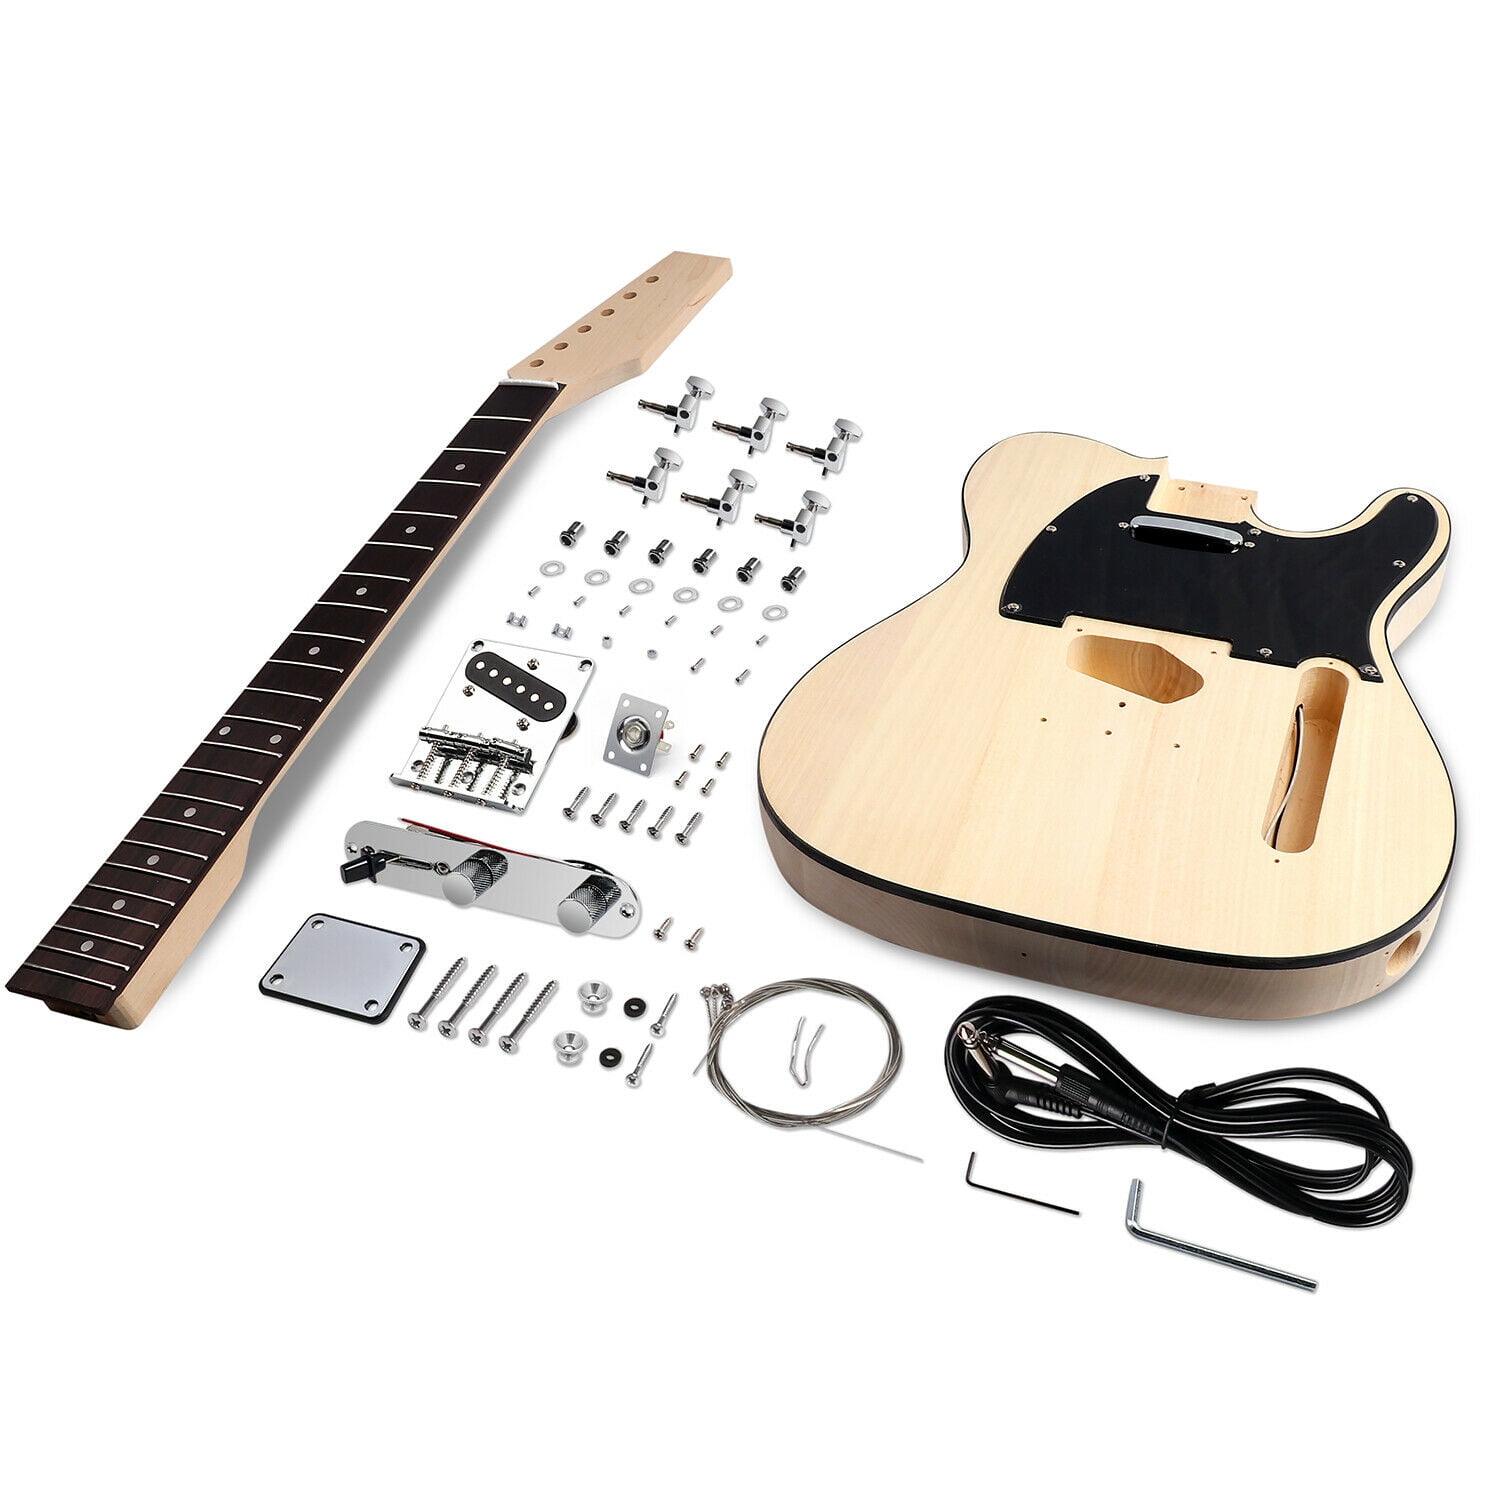 Bogart DIY Electric Guitar Kits Strat Style Beginner Kits 6 String Right Handed with Basswood Body Maple Neck Poplar Laminated Fingerboard Chrome Hardware Build Your Own Guitar. 